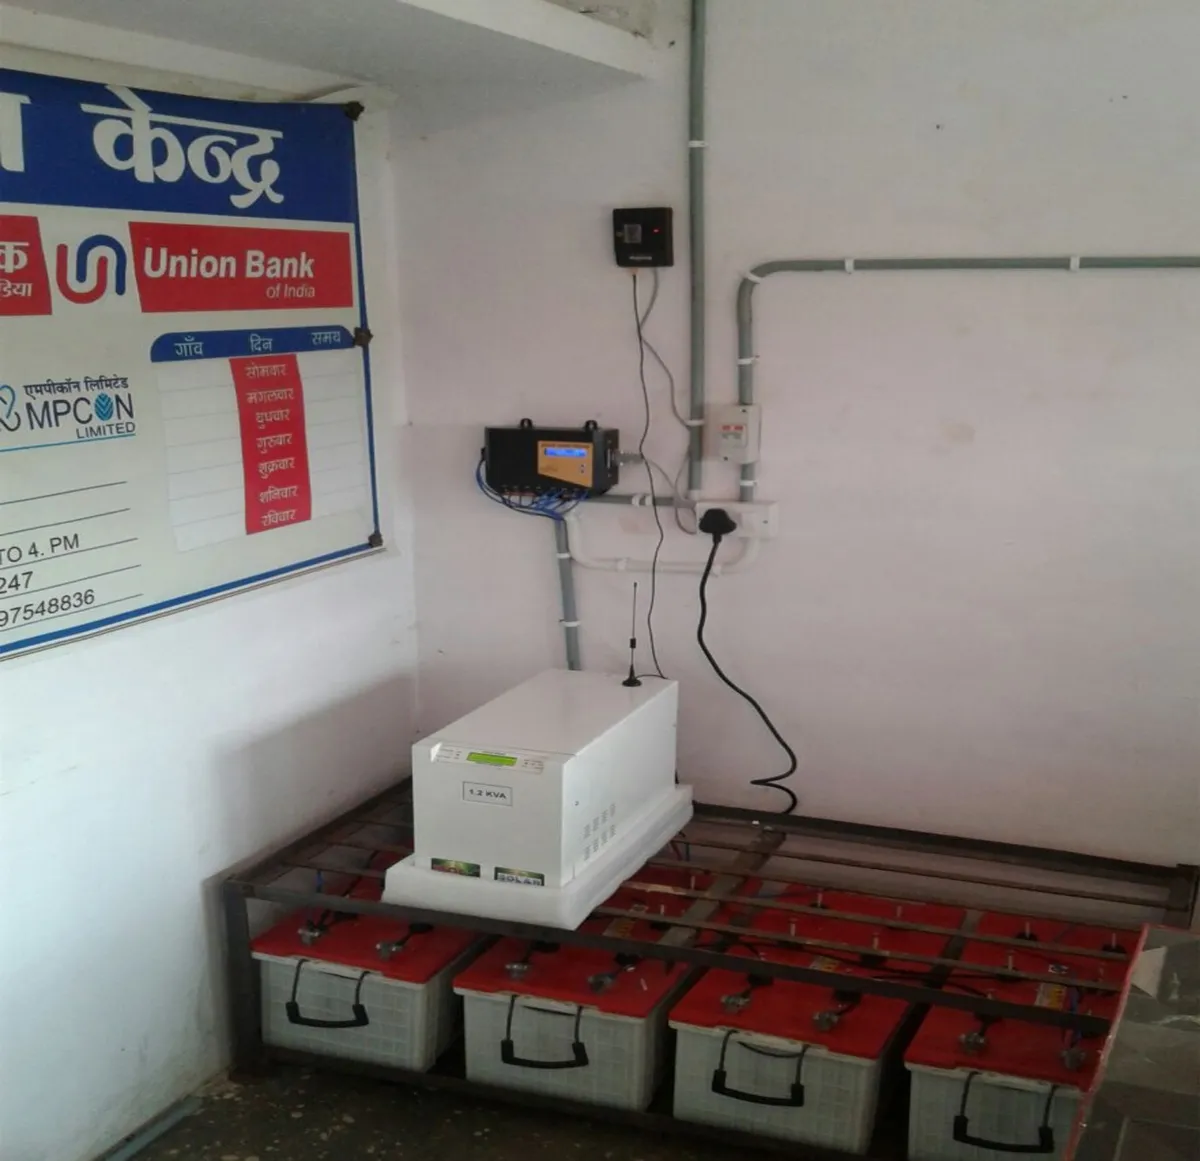 An inverter and battery system is pictured plugged into a wall on top of shelving